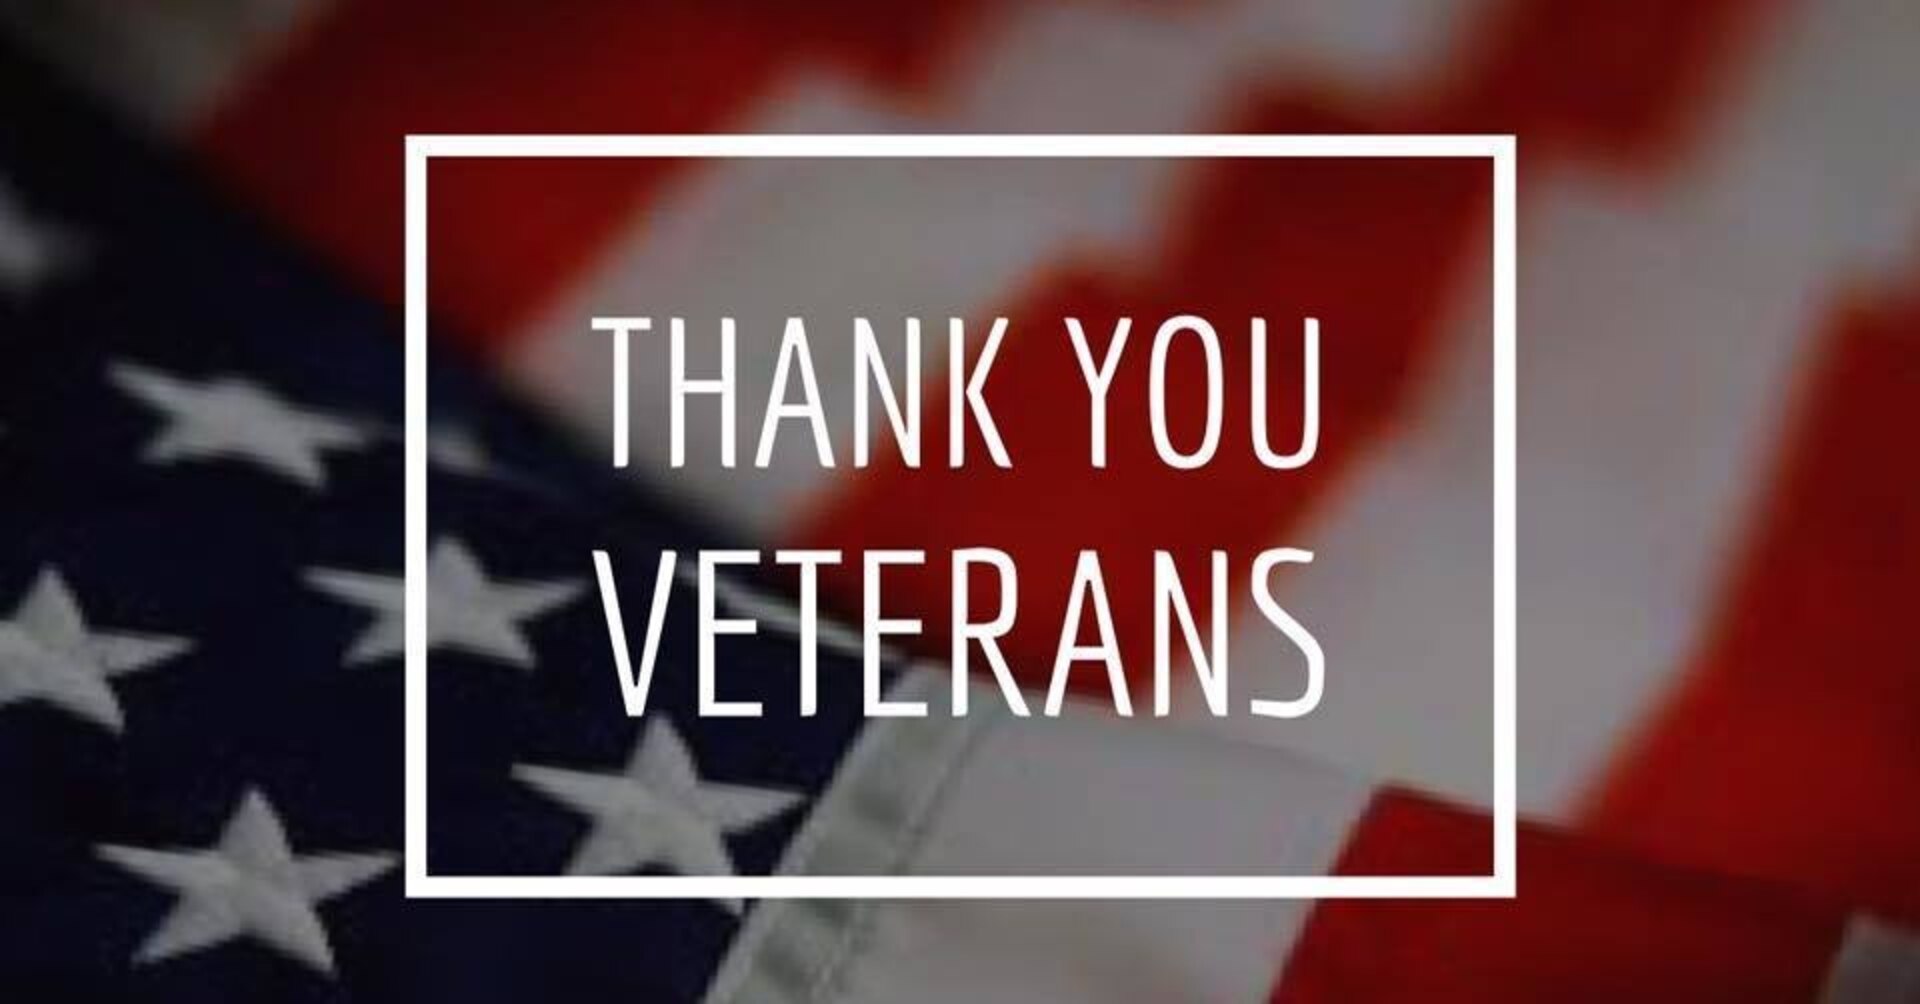 Thank you for your service. Thank you for your sacrifice. Thank you for protecting our freedom and our liberty. Thank you #veterans.